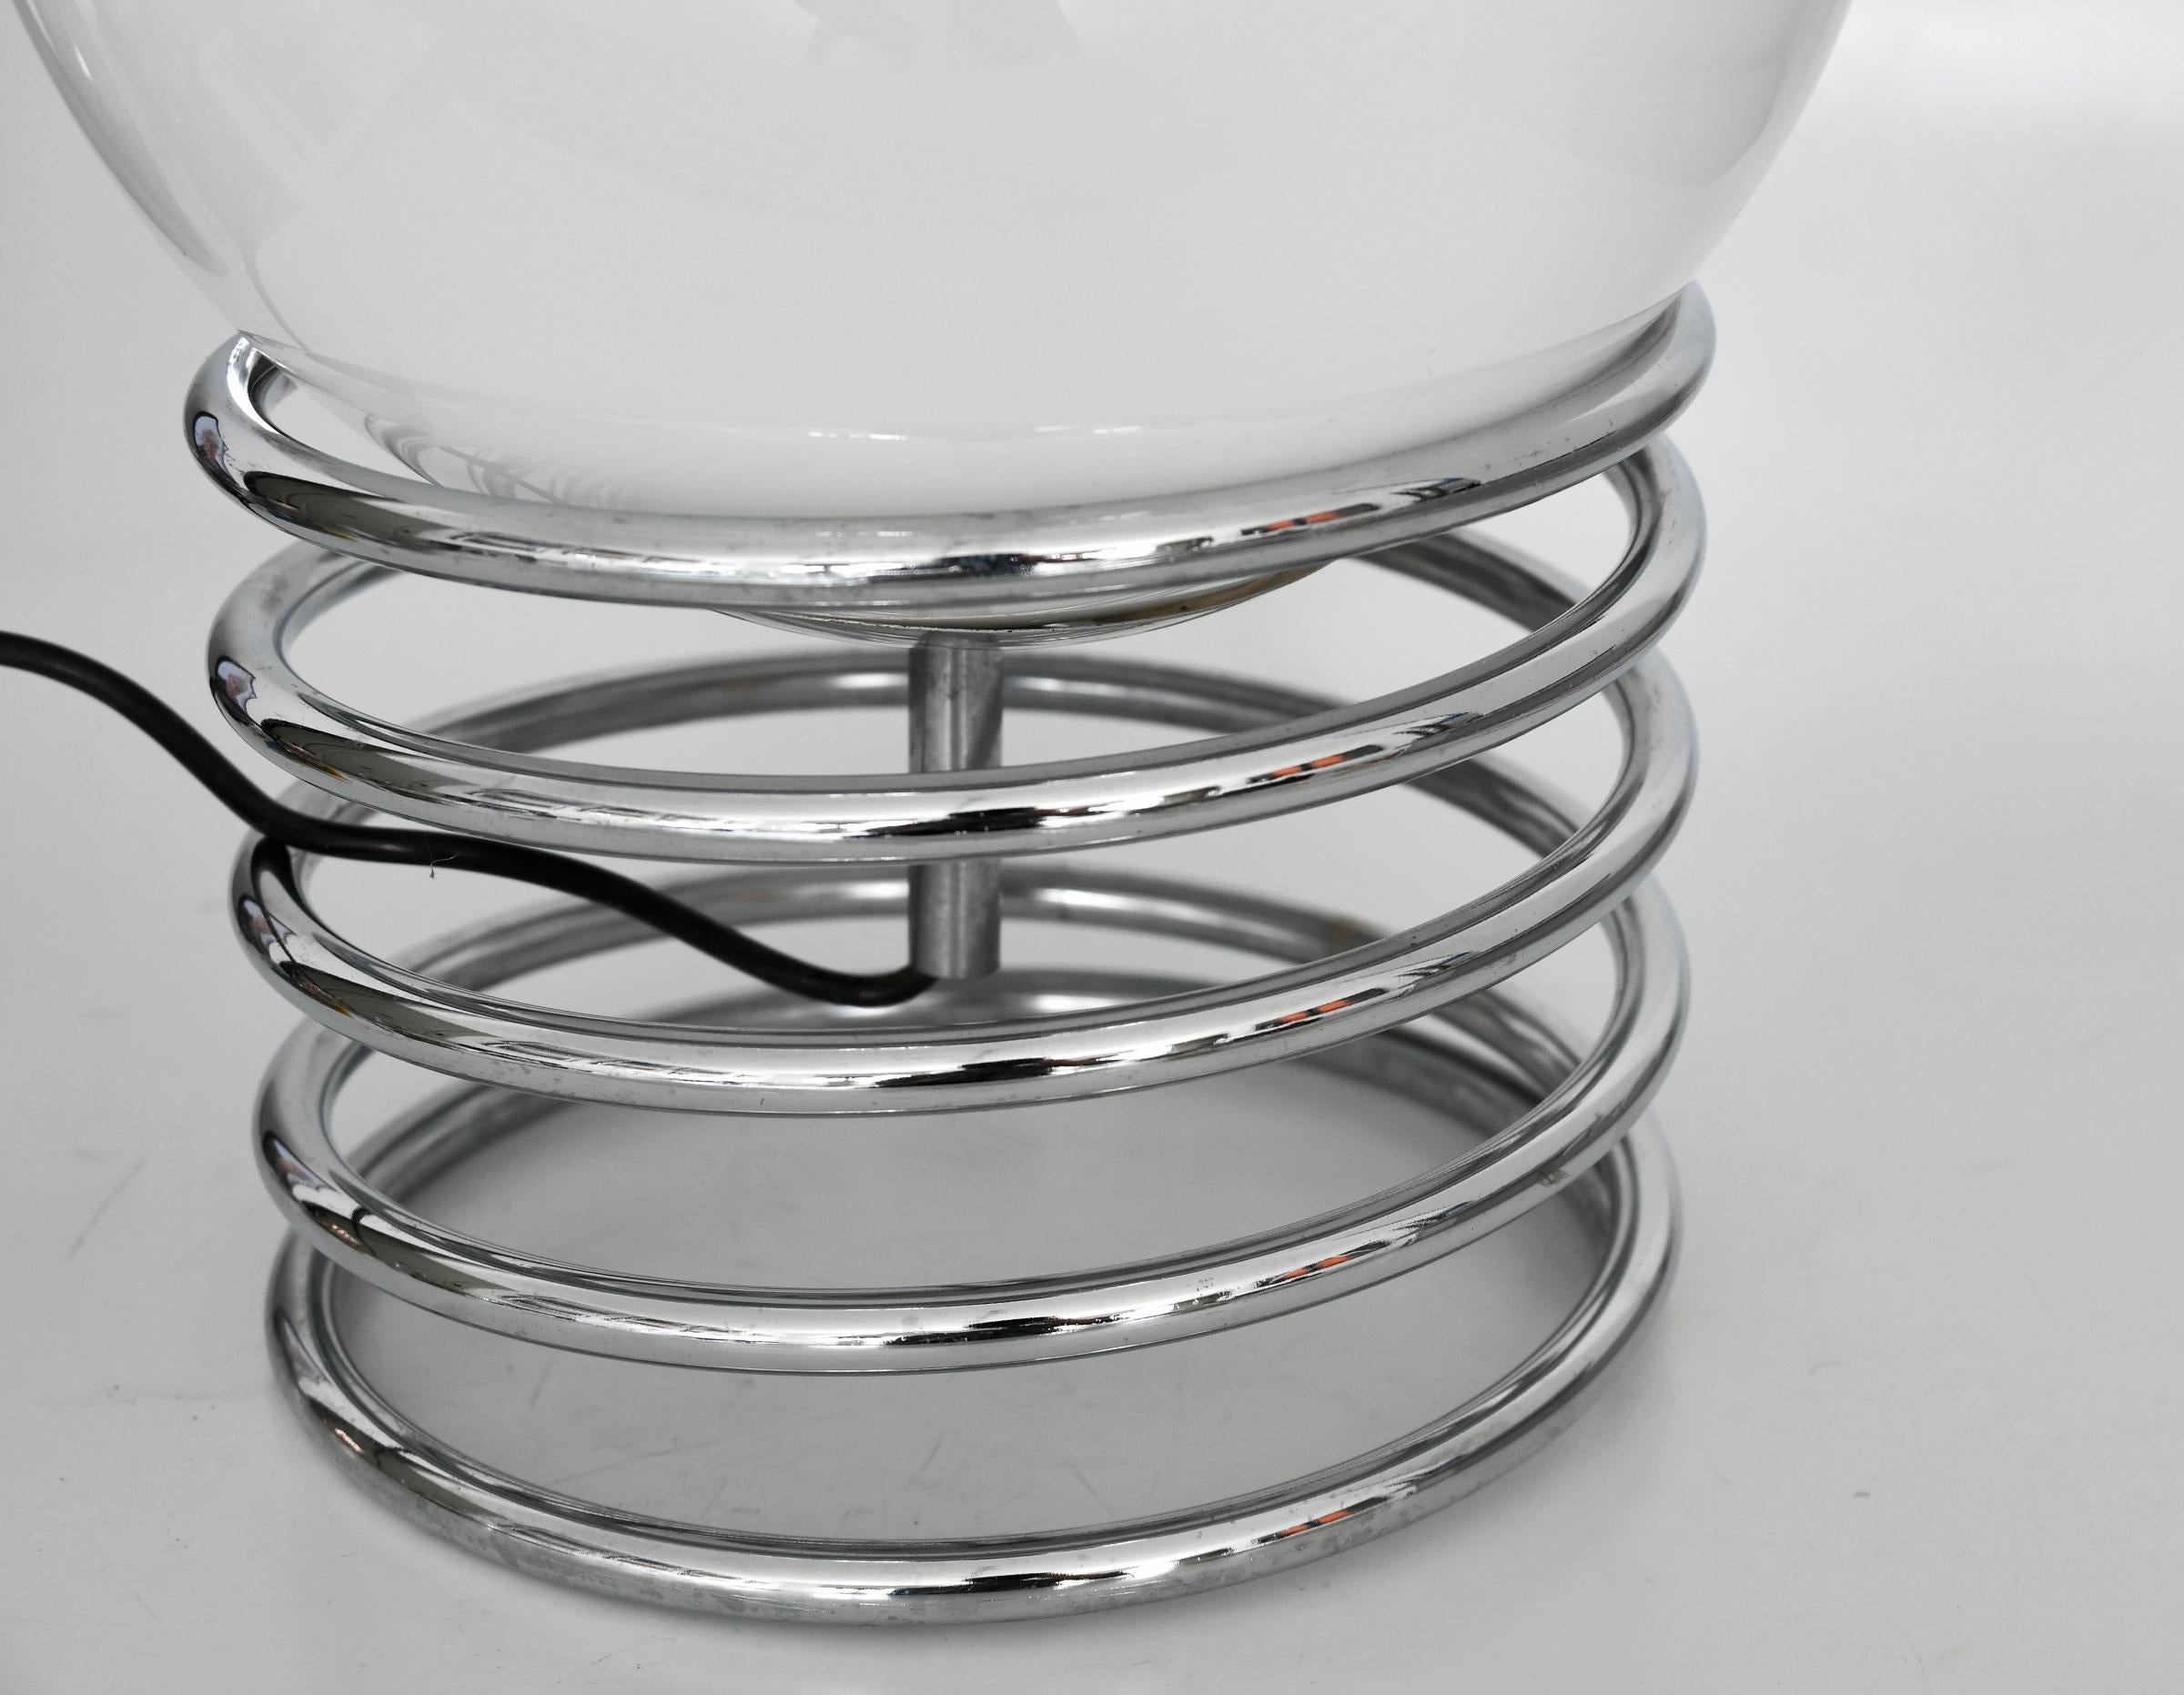 20th Century Spiral Lamp from the 70s Manufacture Ingo Maurer Design MChrome In Good Condition For Sale In Epfach, DE